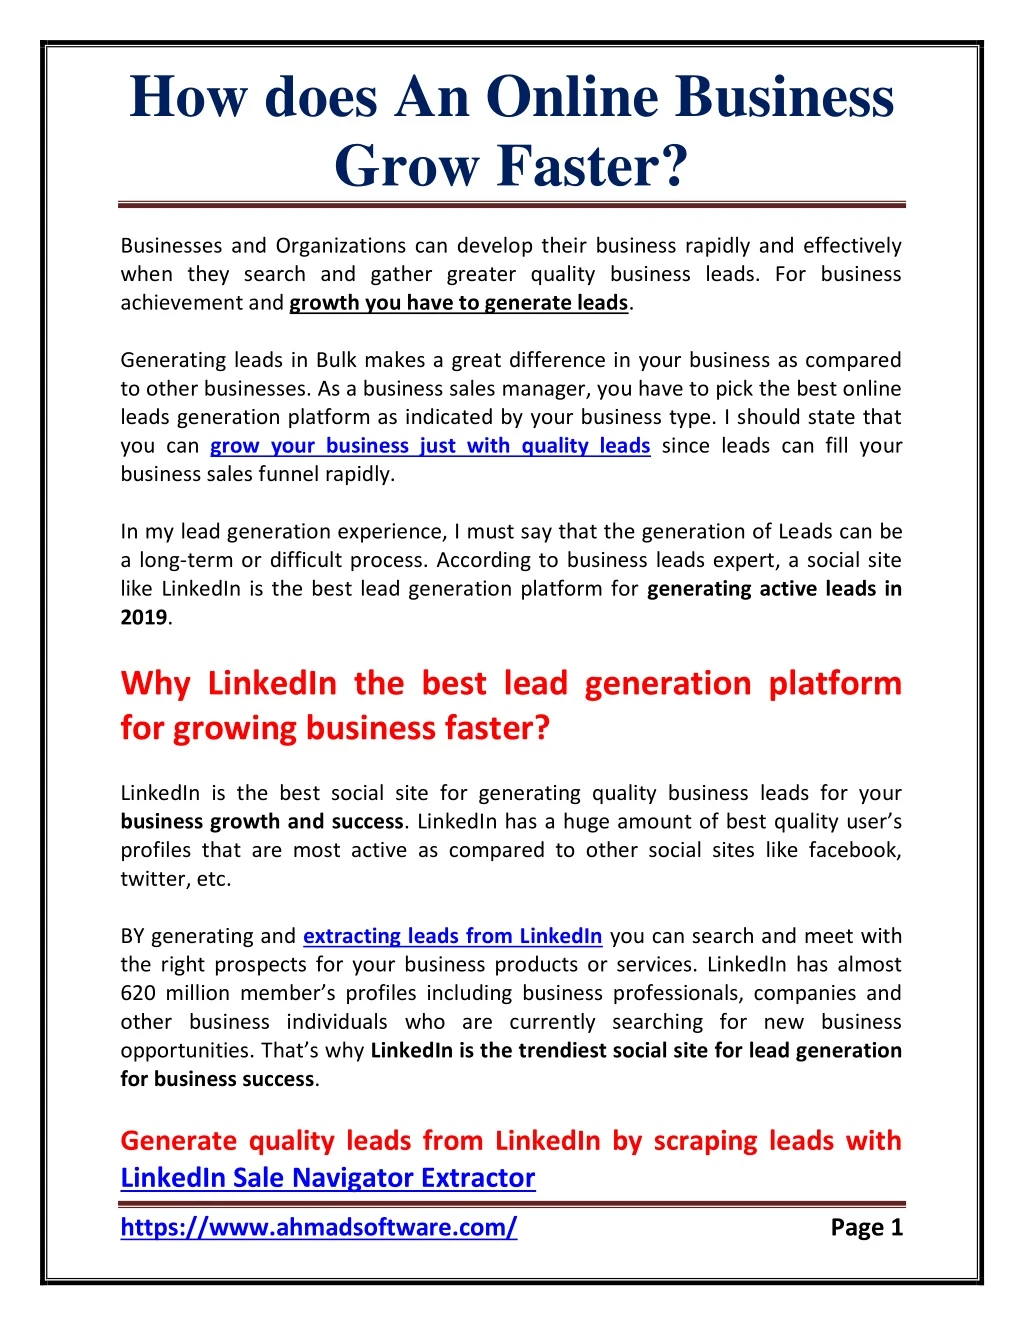 how does an online business grow faster